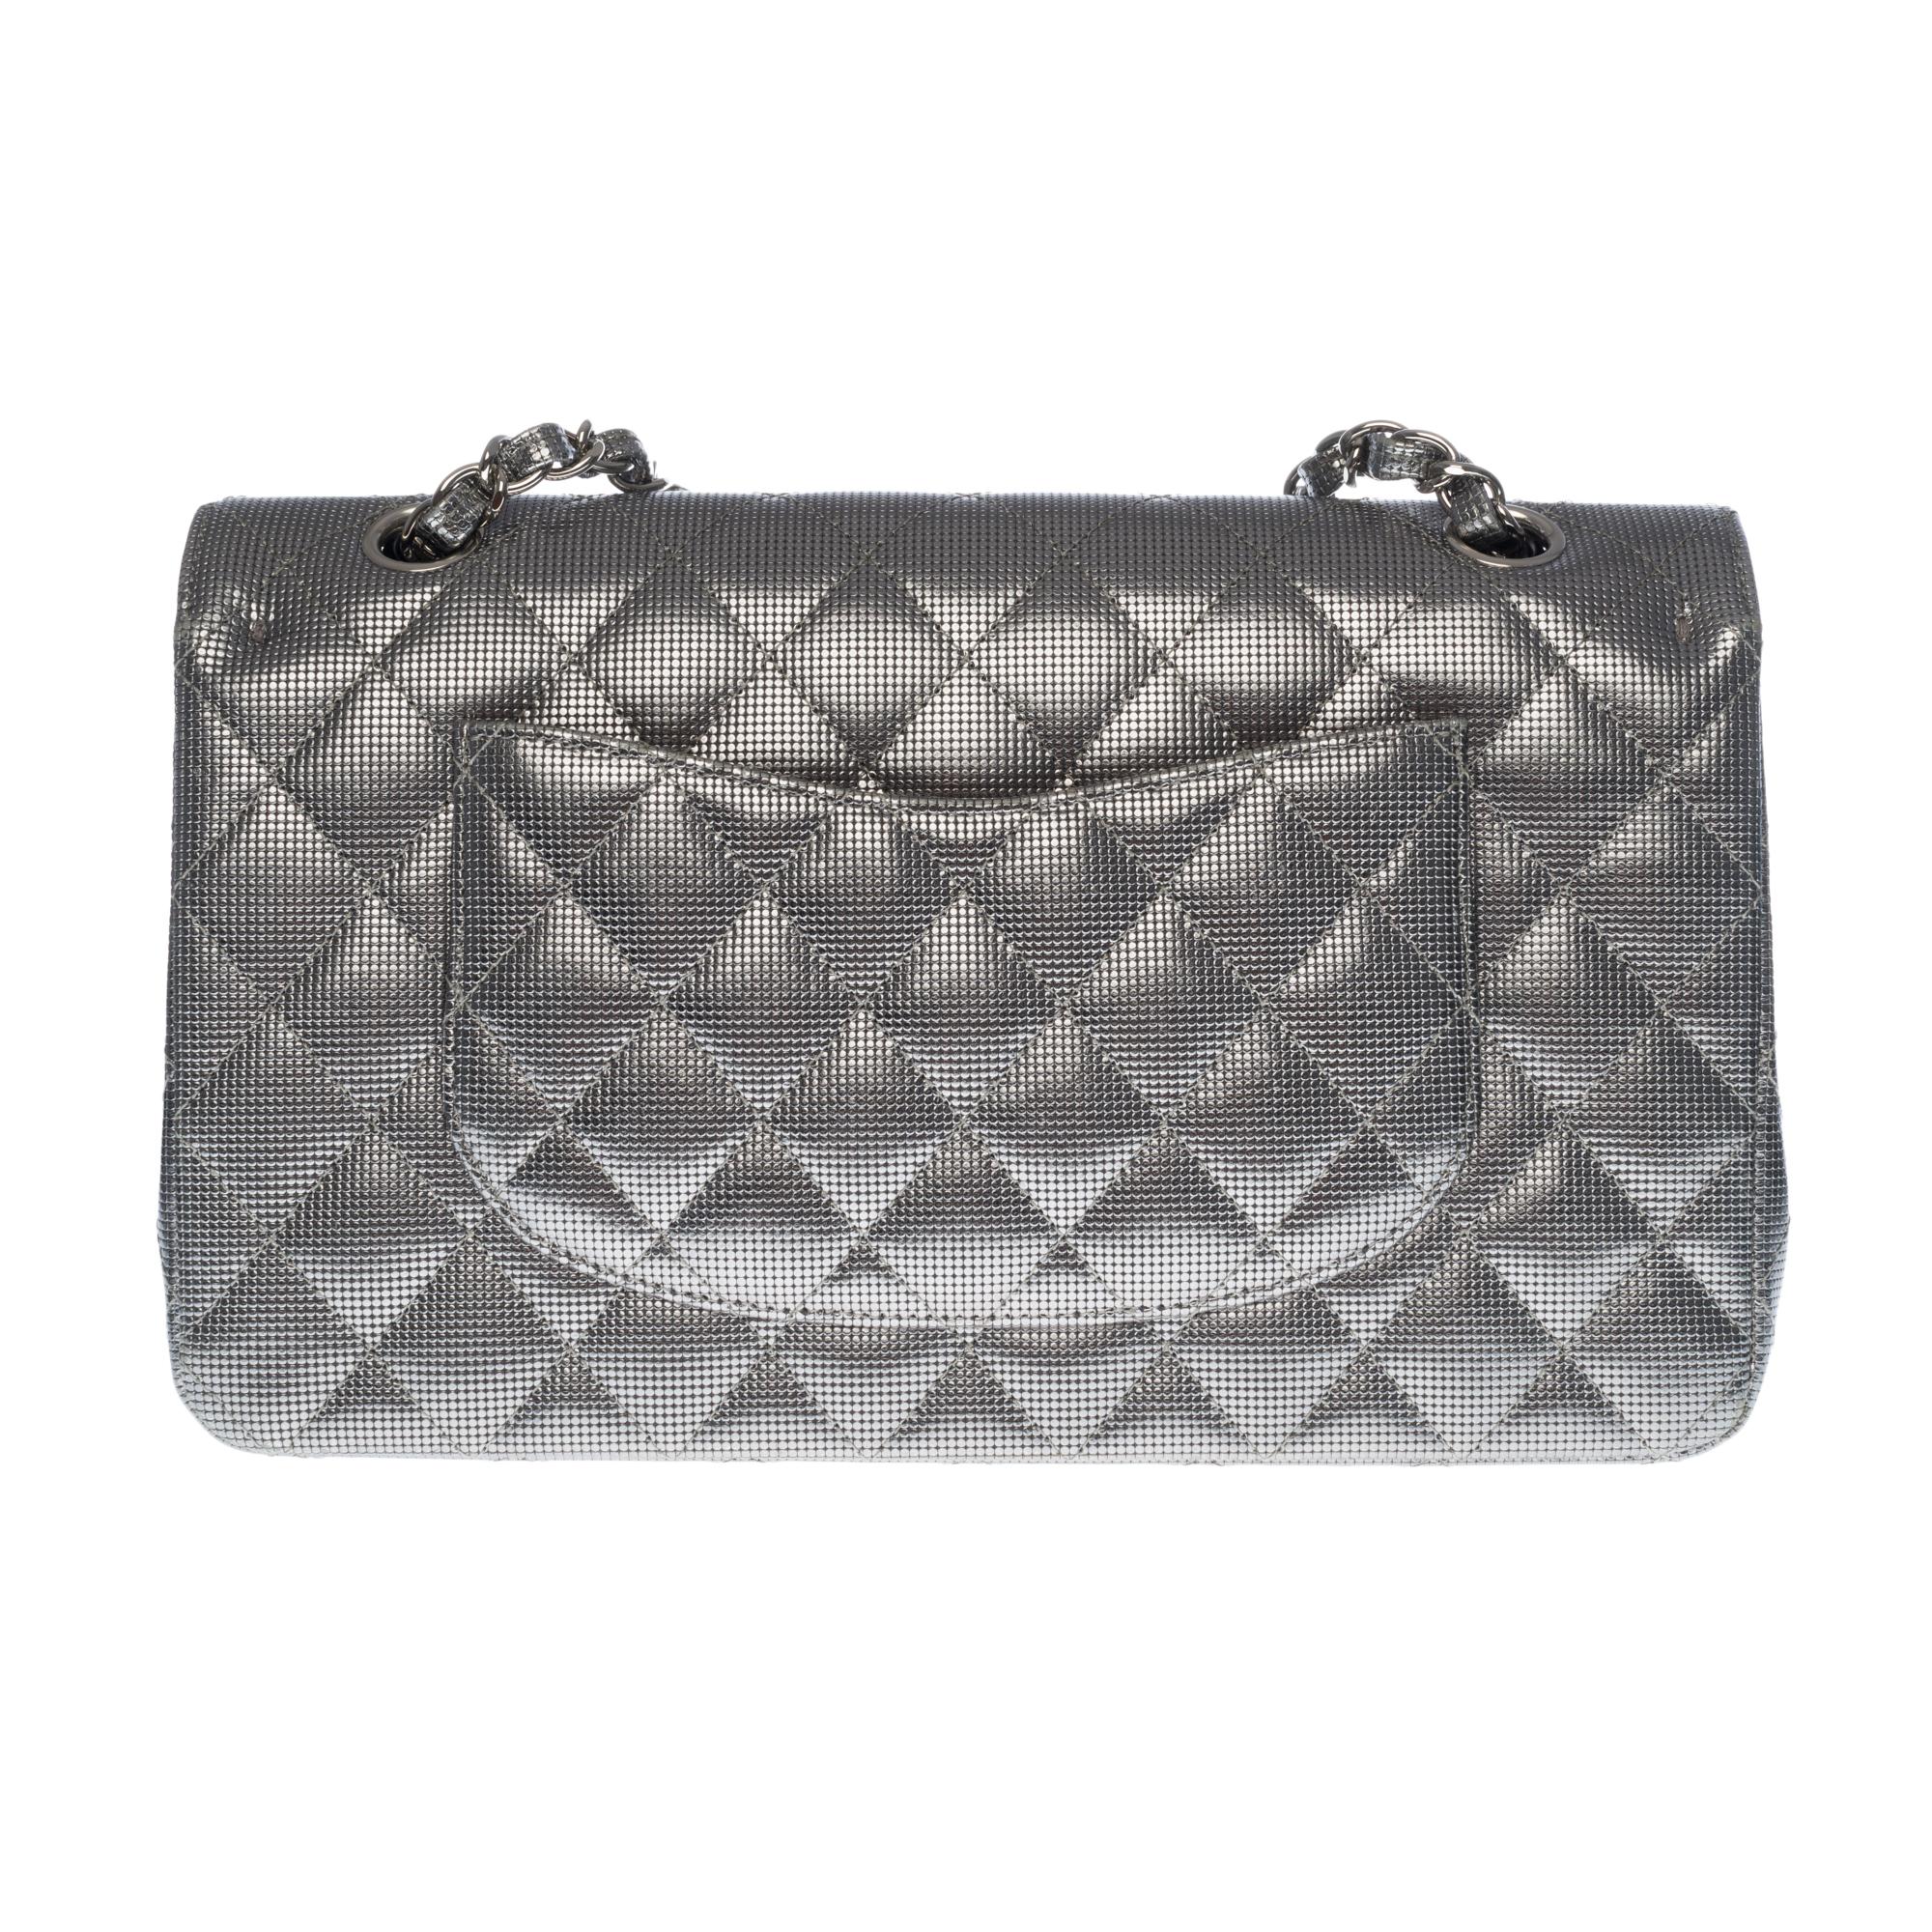 Rare & Stunning Chanel Timeless Medium 25cm Double Flap Silver Metallic Quilted Leather Handbag, Silver Metal hardware, Silver Metal Chain Handle Interwoven with Silver Leather for Hand or Shoulder Support
Silver metal flap closure
Patch pocket on